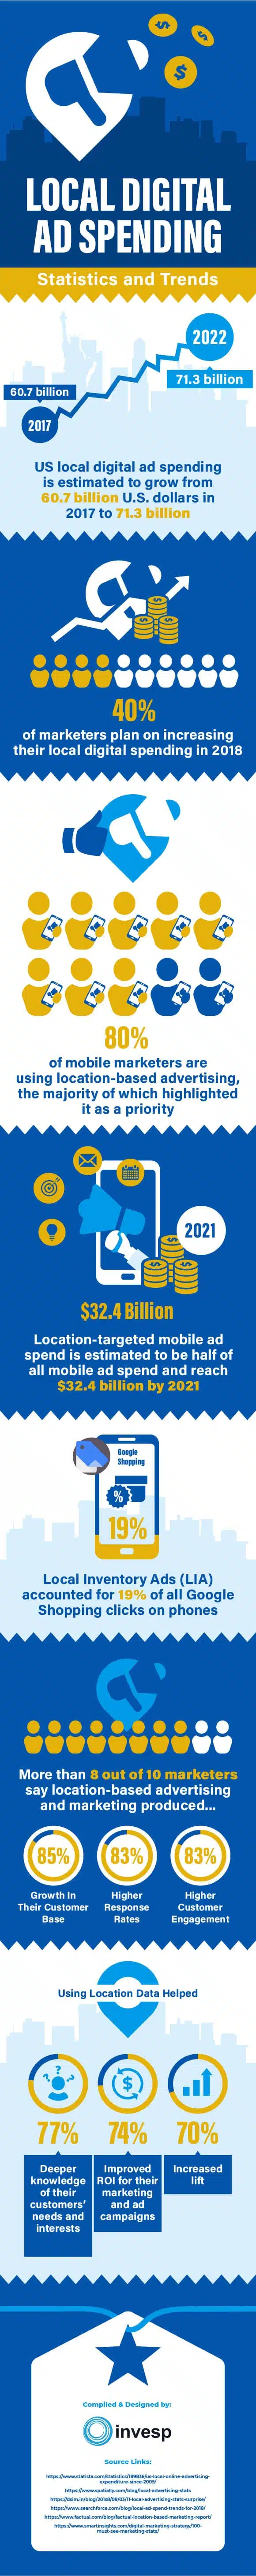 The State of Local Digital Ad Spending – Statistics and Trends